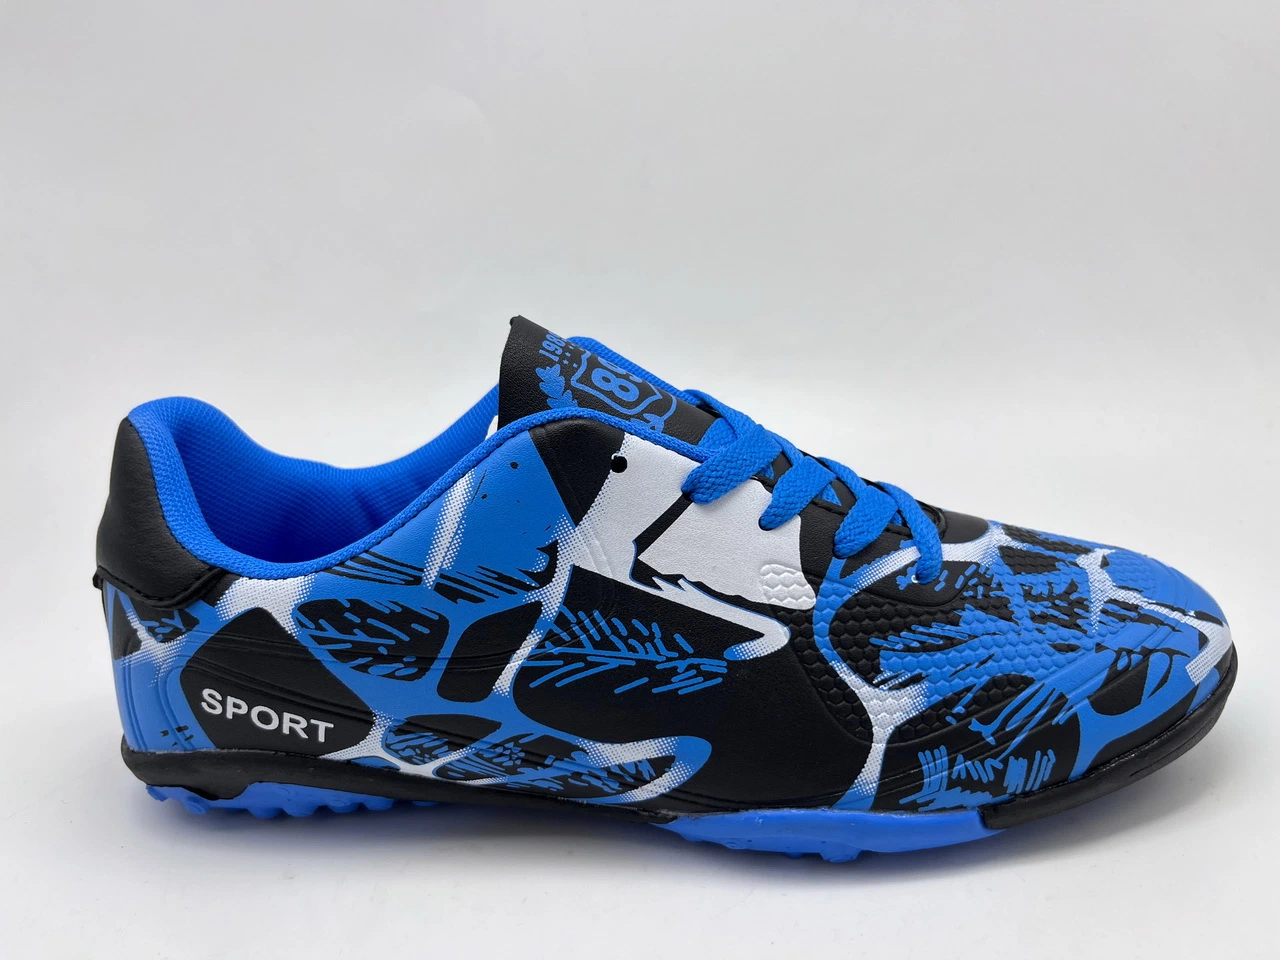 Indoor Training Soccer Shoes Comfortable Anti-Slip Football Shoes in Stock for Men and Lady and Kids